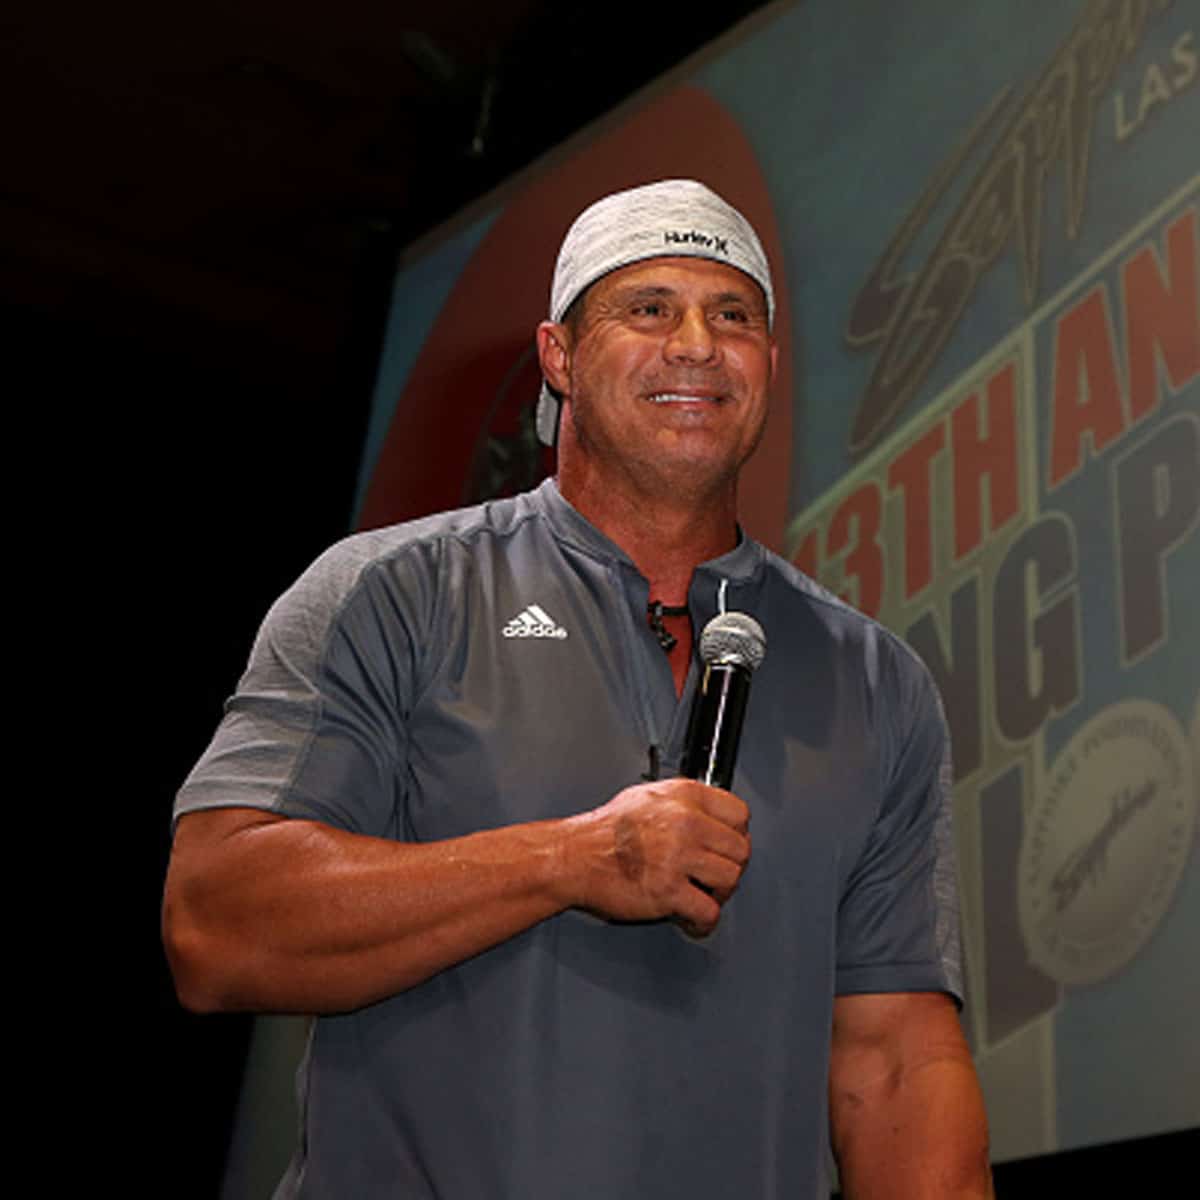 Jose Canseco Net Worth, Age, Bio, Twitter, and Daughter